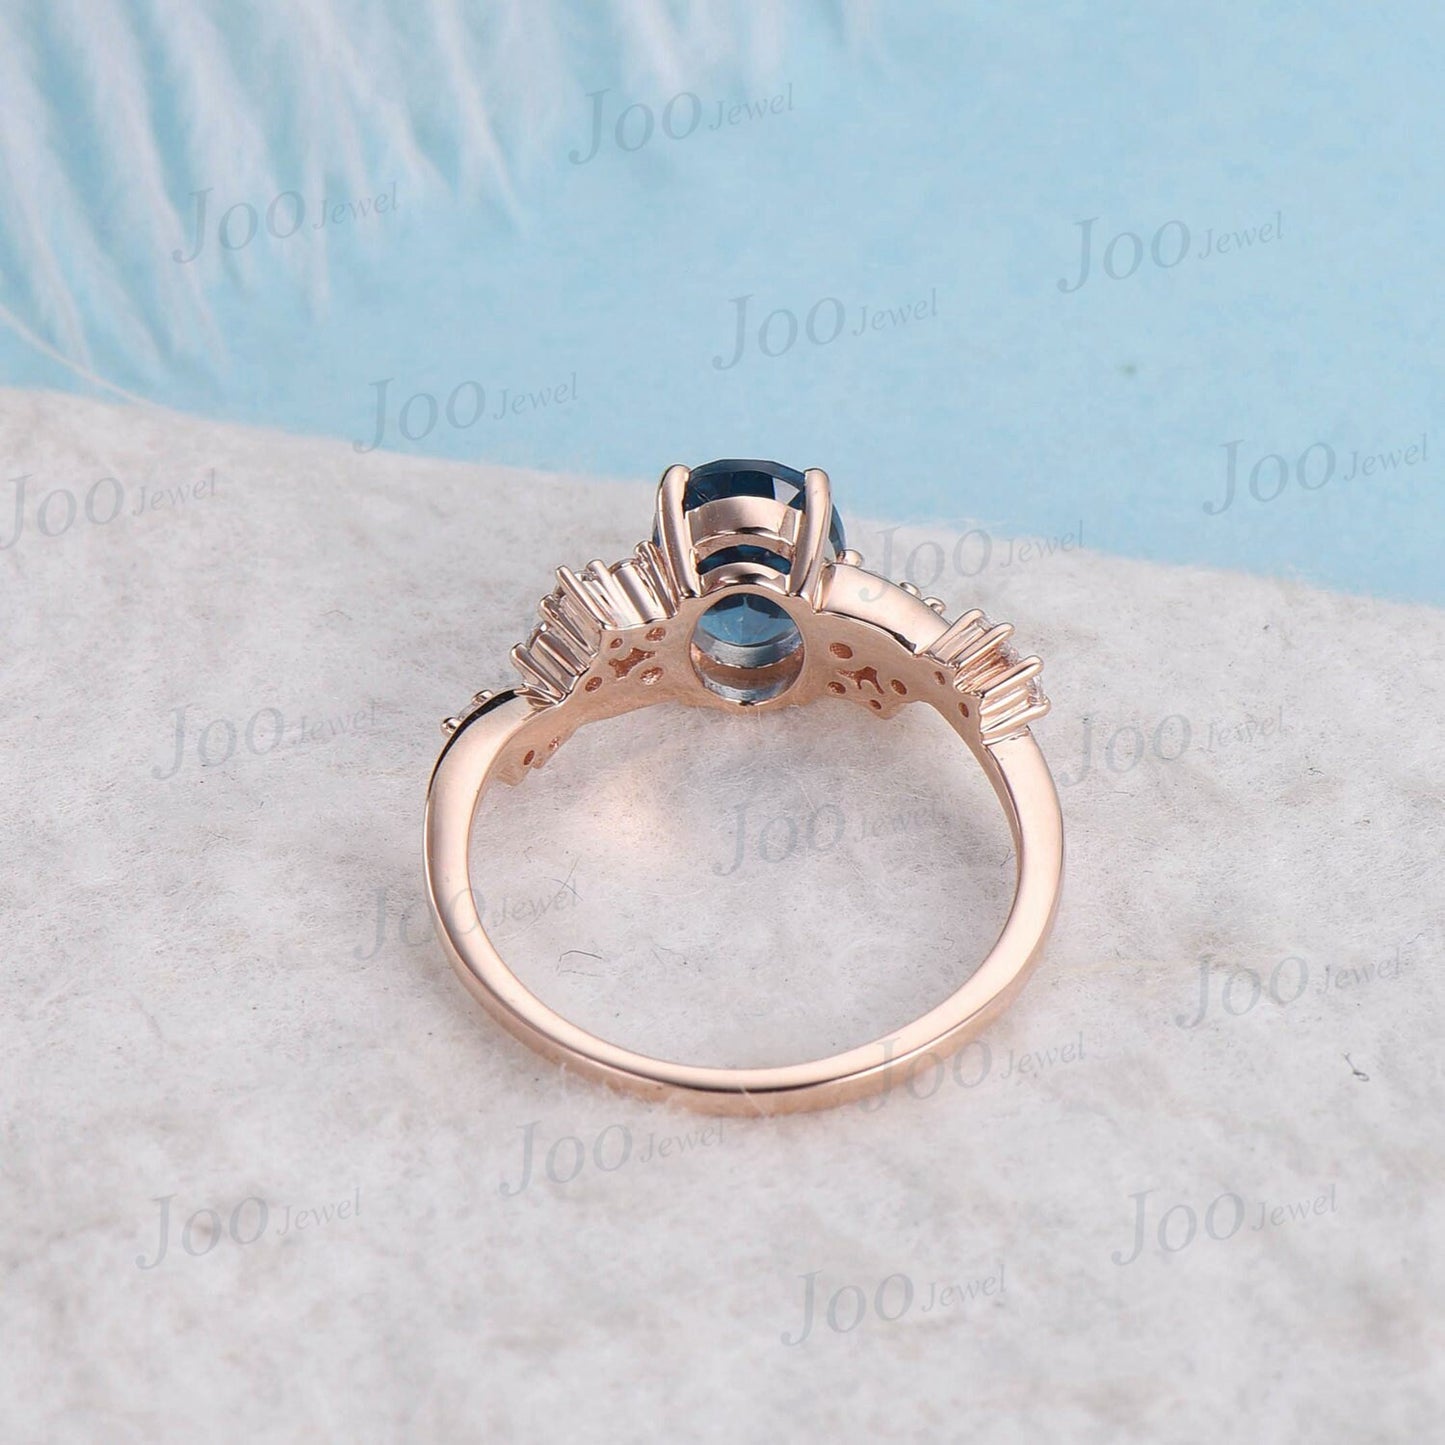 1.5ct Oval Blue Opal Engagement Ring Vintage Rose Gold Cluster Moissanite Wedding Ring Anniversary Gift Galaxy Blue Fire Opal Promise Rings